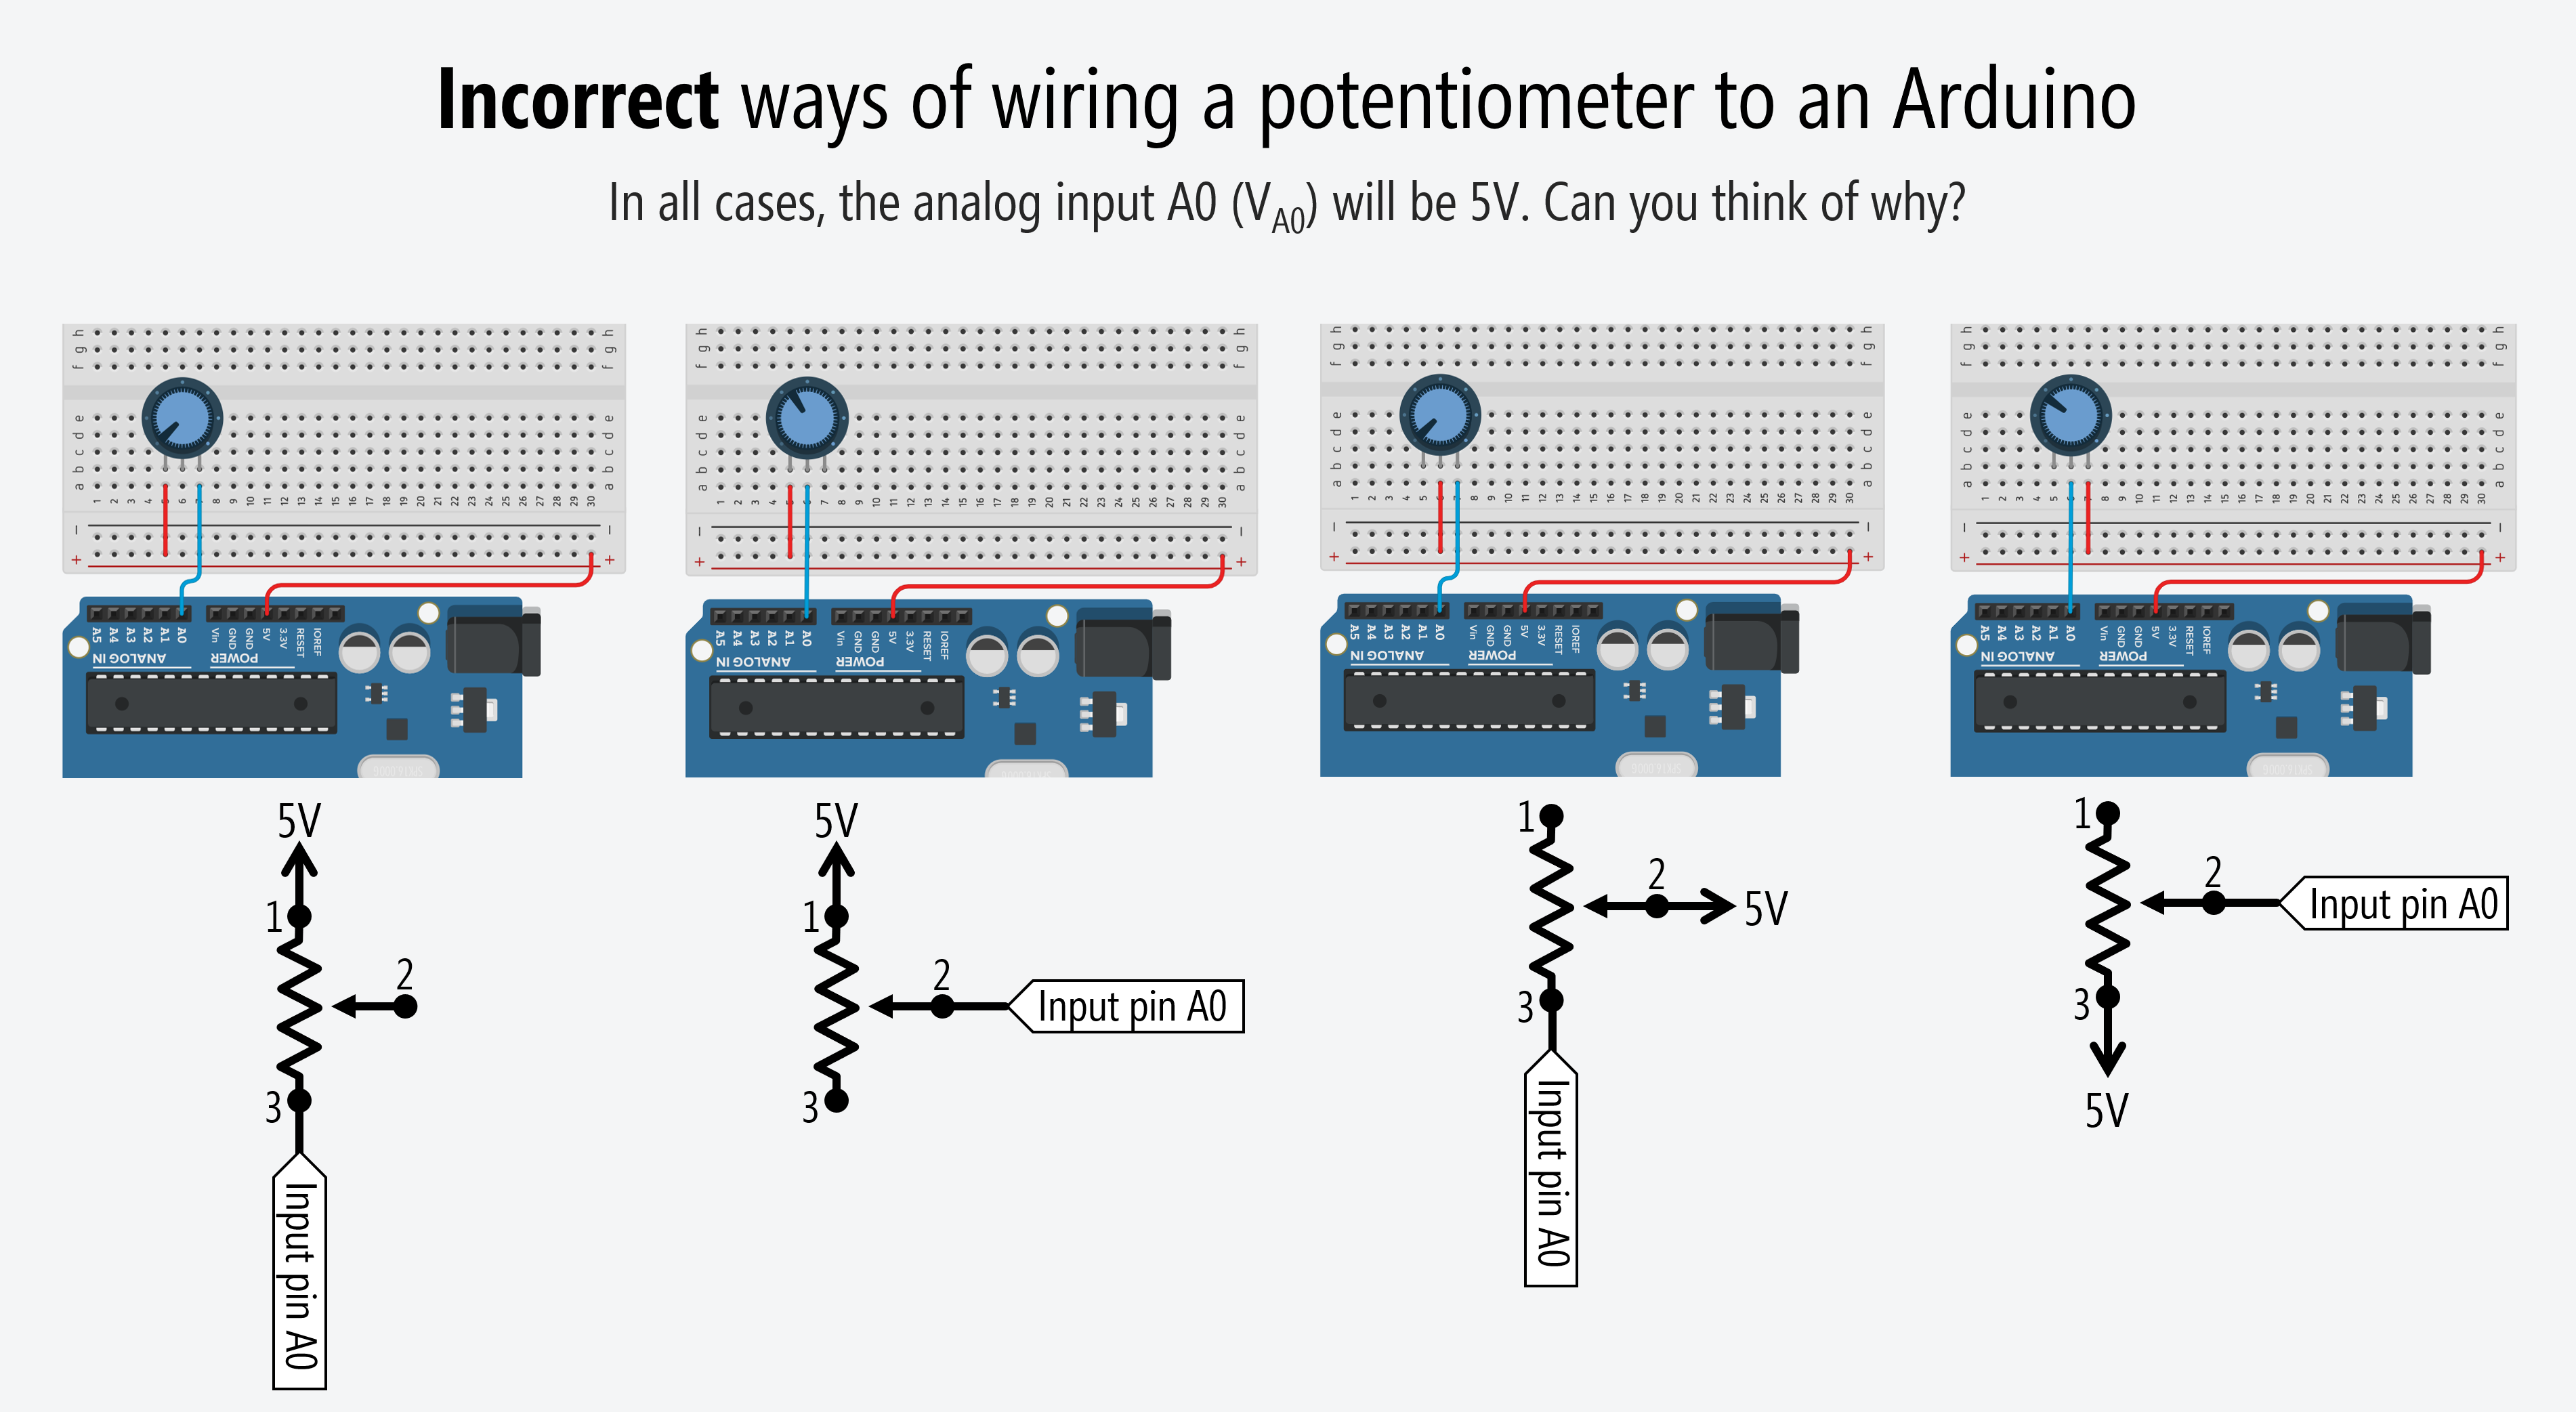 Incorrect ways to hook up potentiometers with microcontrollers